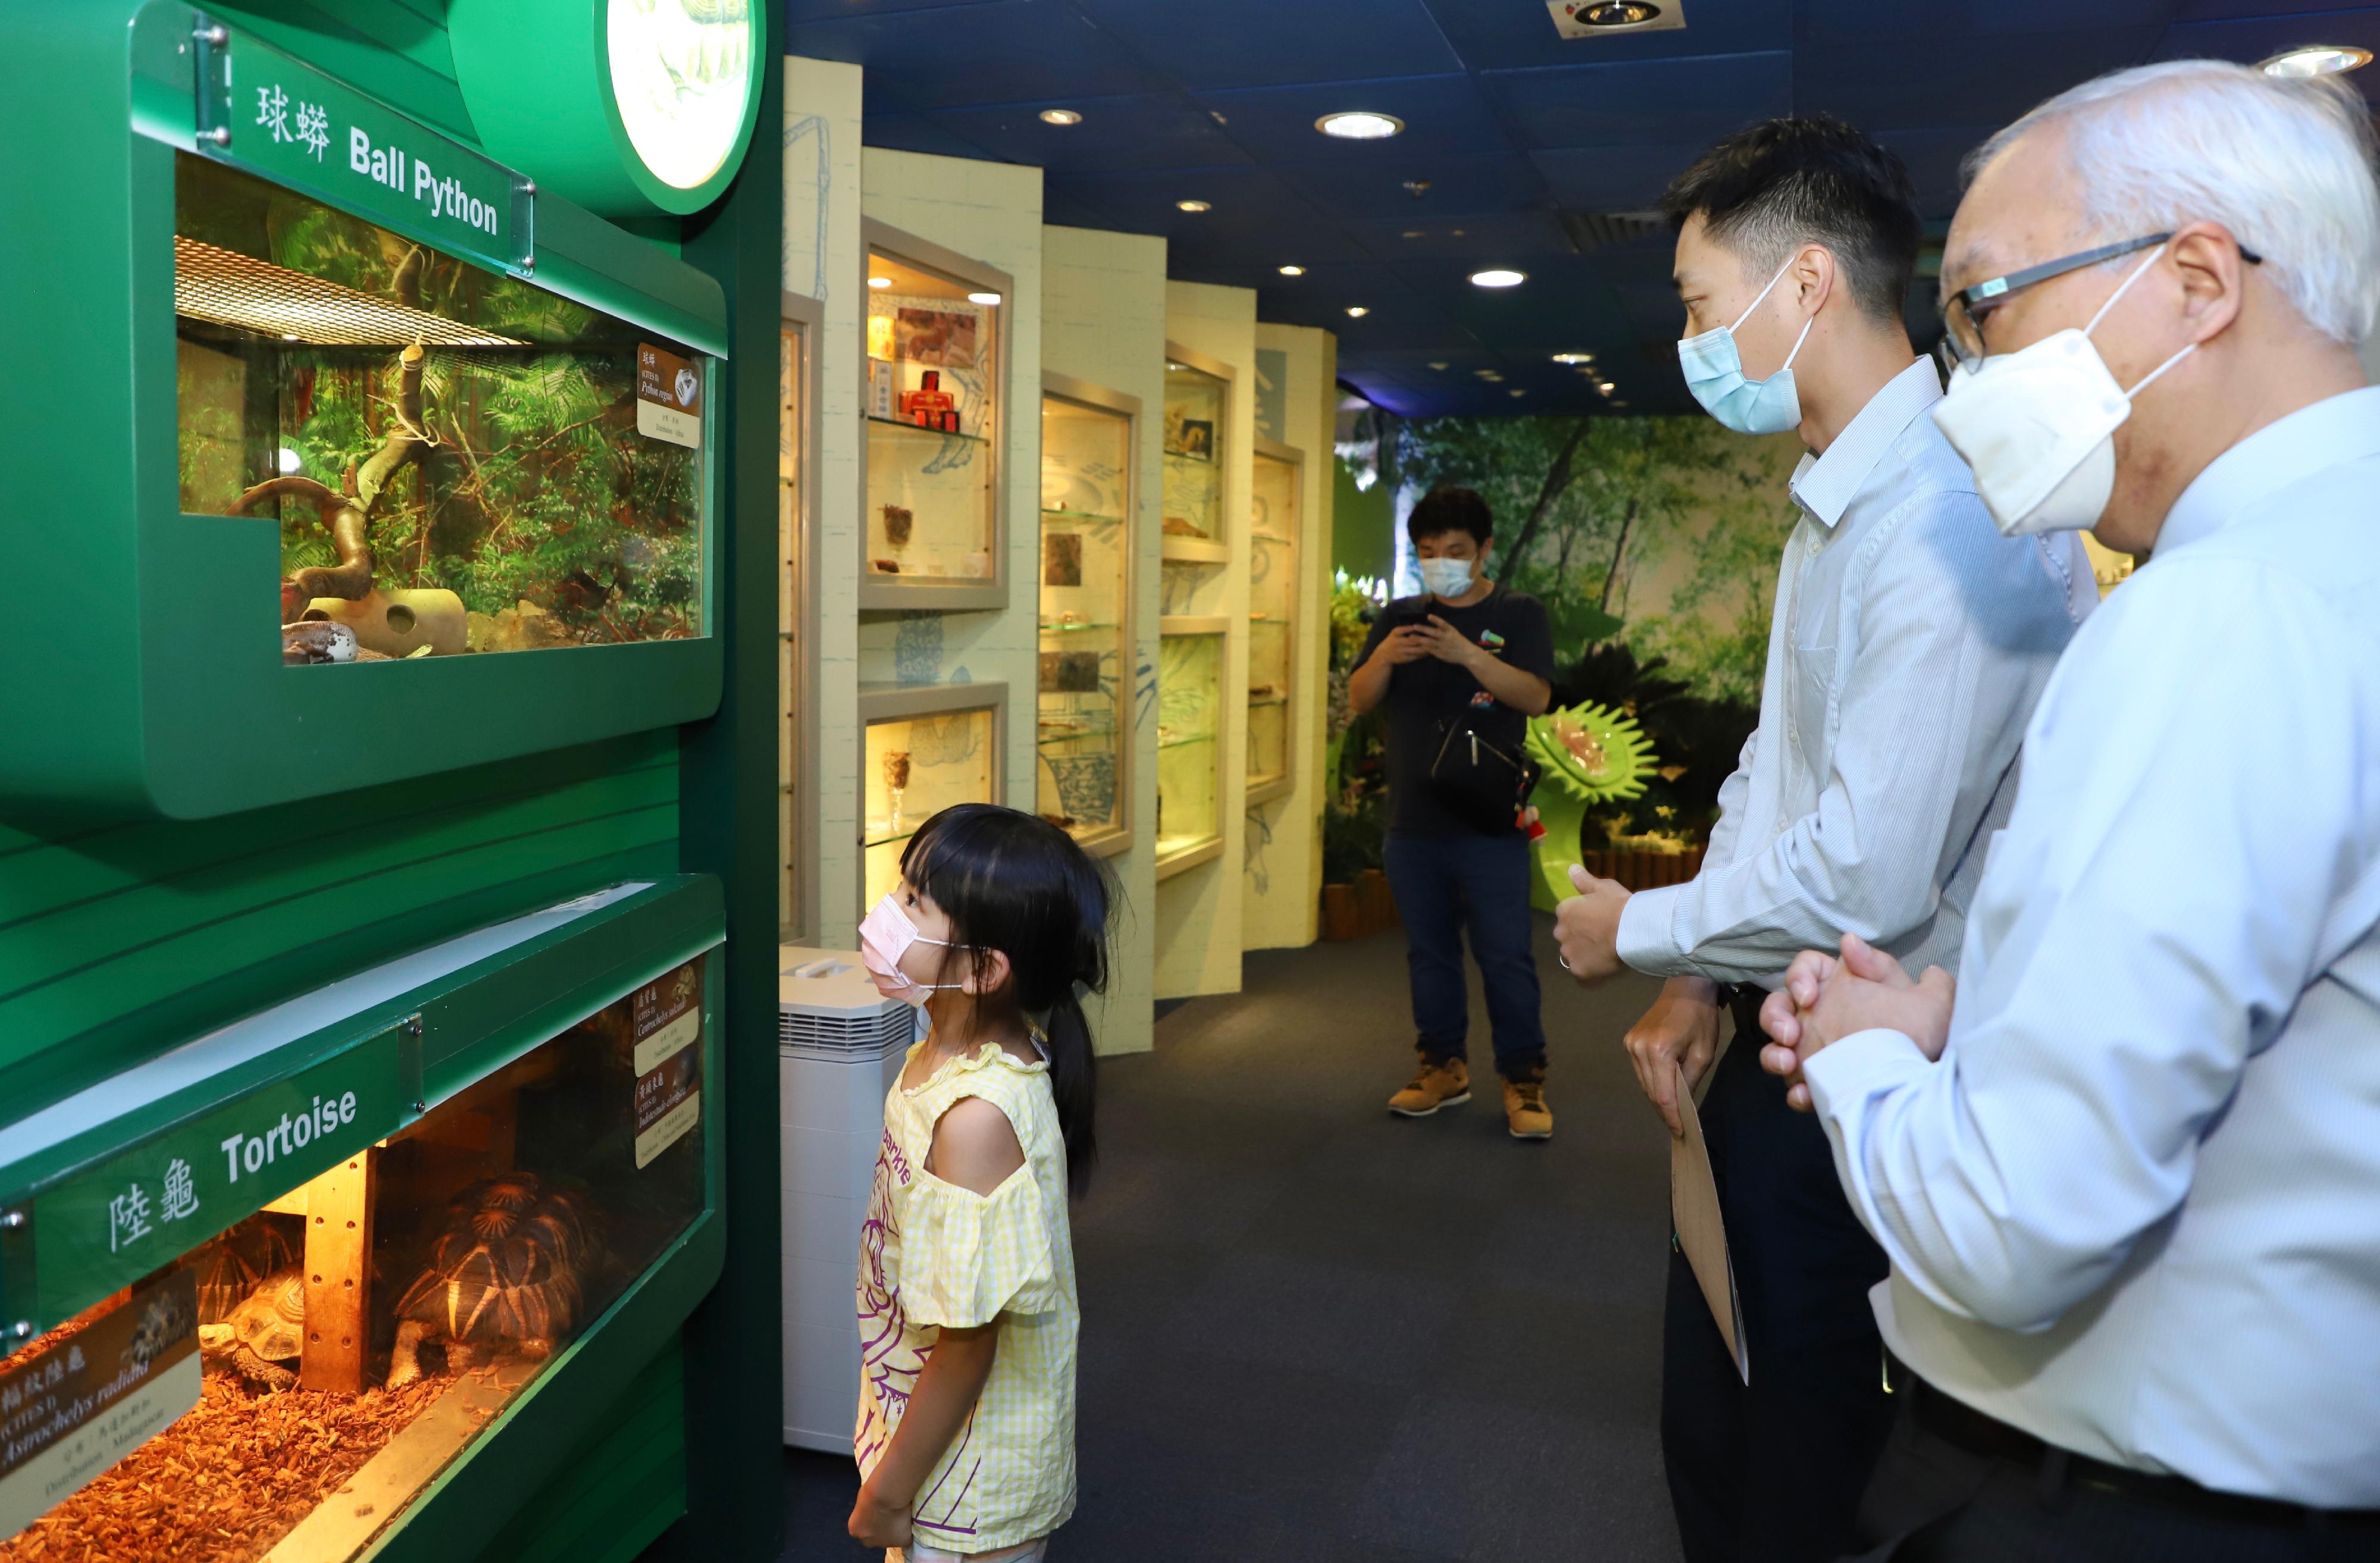 The Secretary for Environment and Ecology, Mr Tse Chin-wan (first right), today (July 22) visits the Endangered Species Resource Centre to learn more about the work of the Agriculture, Fisheries and Conservation Department in protecting endangered species of animals and plants.